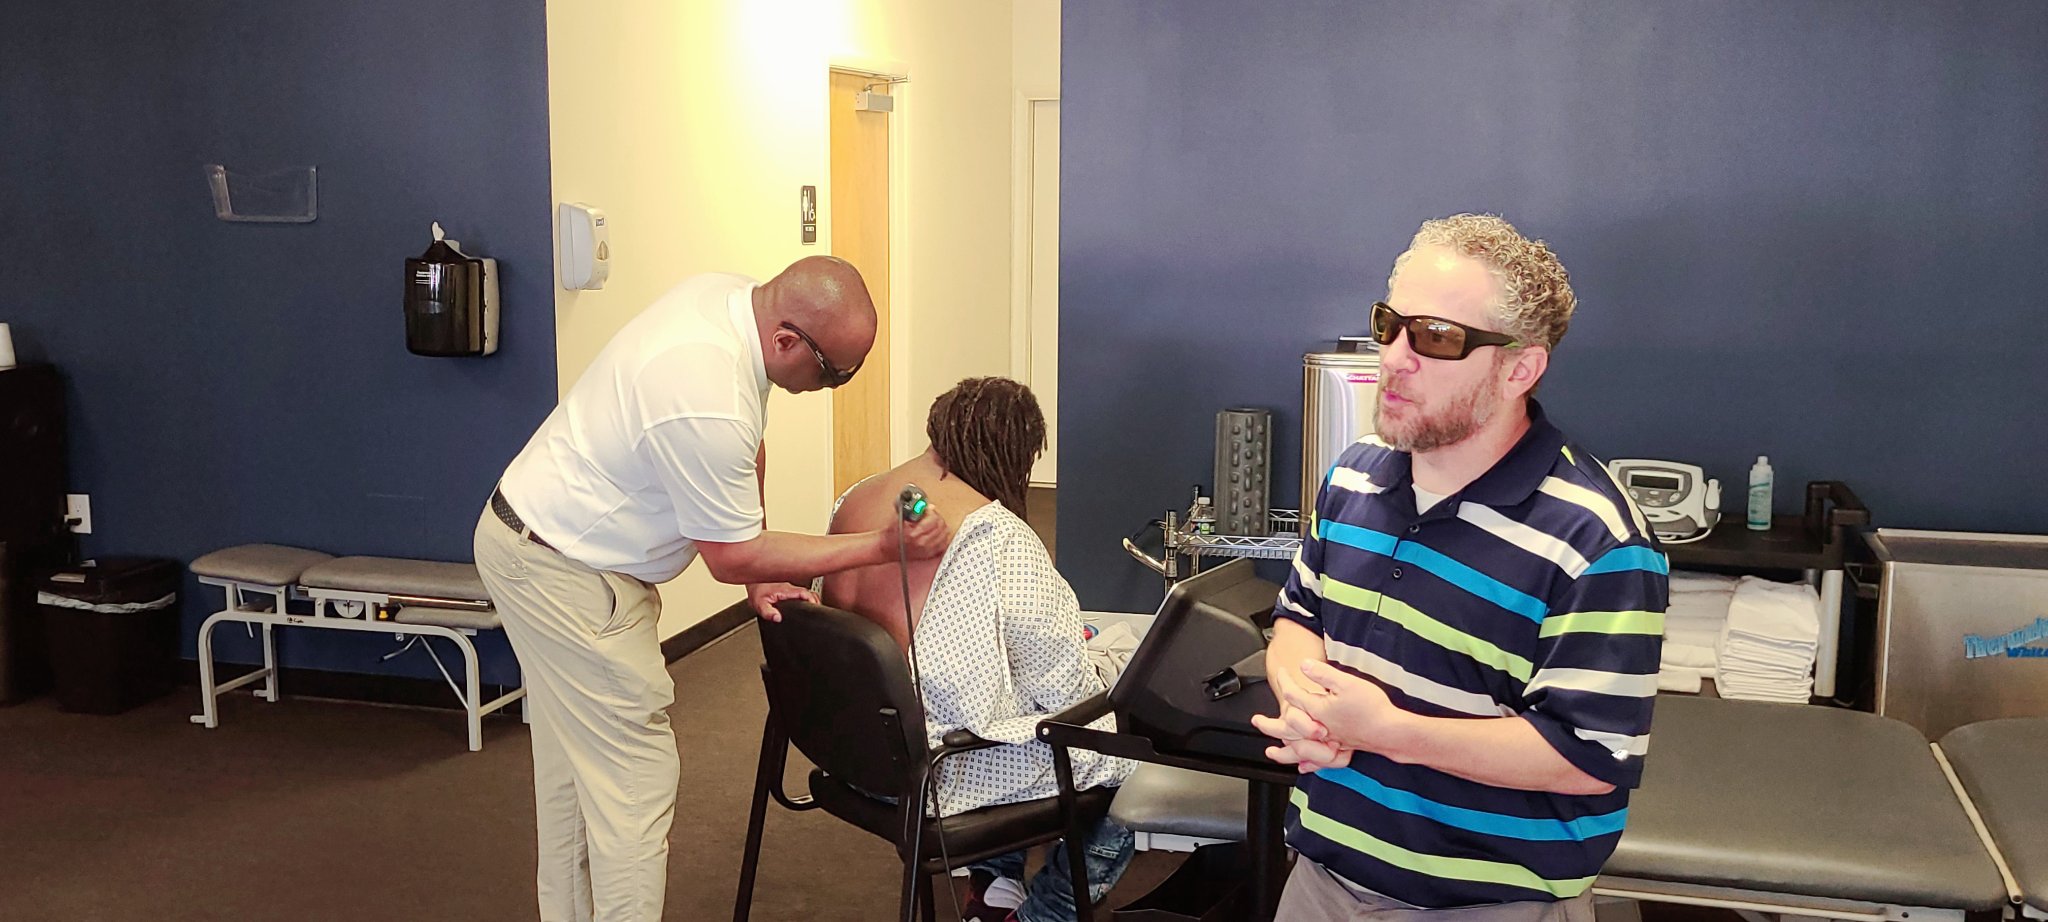 Adam Marmon, a representative from Enovis-LightForce Lasers explained treatment, while Dr. Briddell performed deep tissue laser therapy on a patient